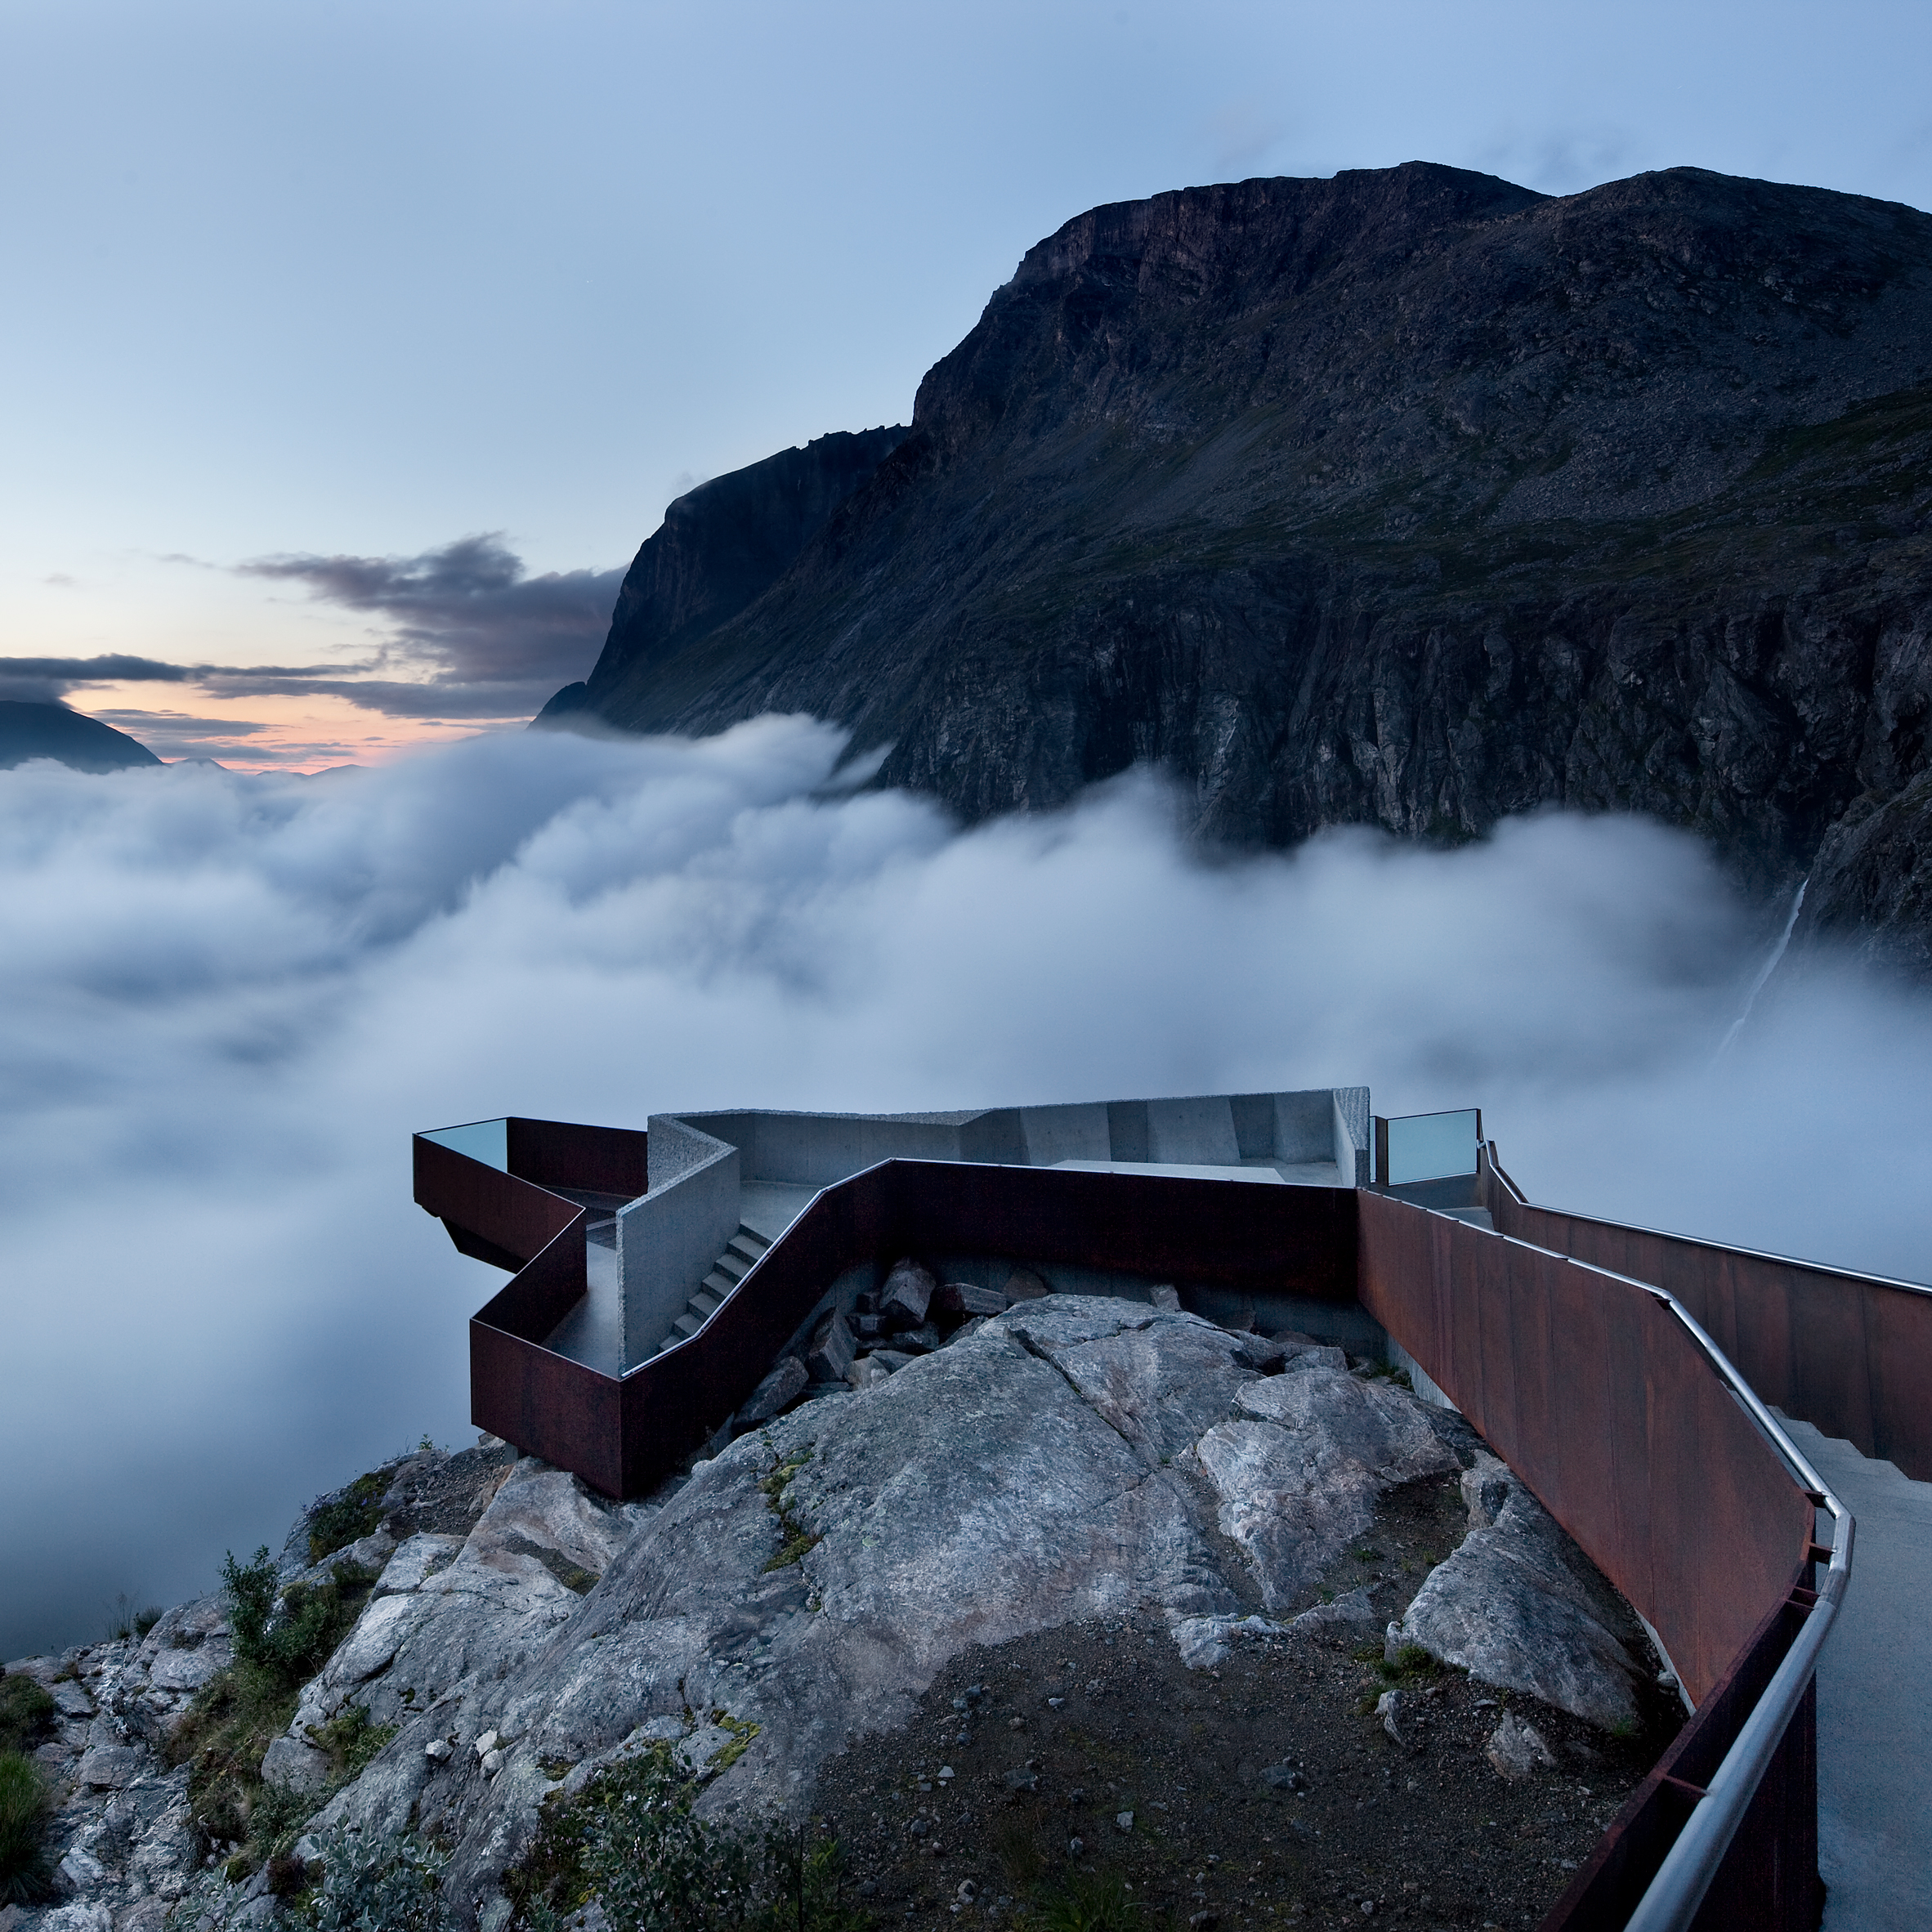 10 must-see landmarks on Norway's scenic tourist trails